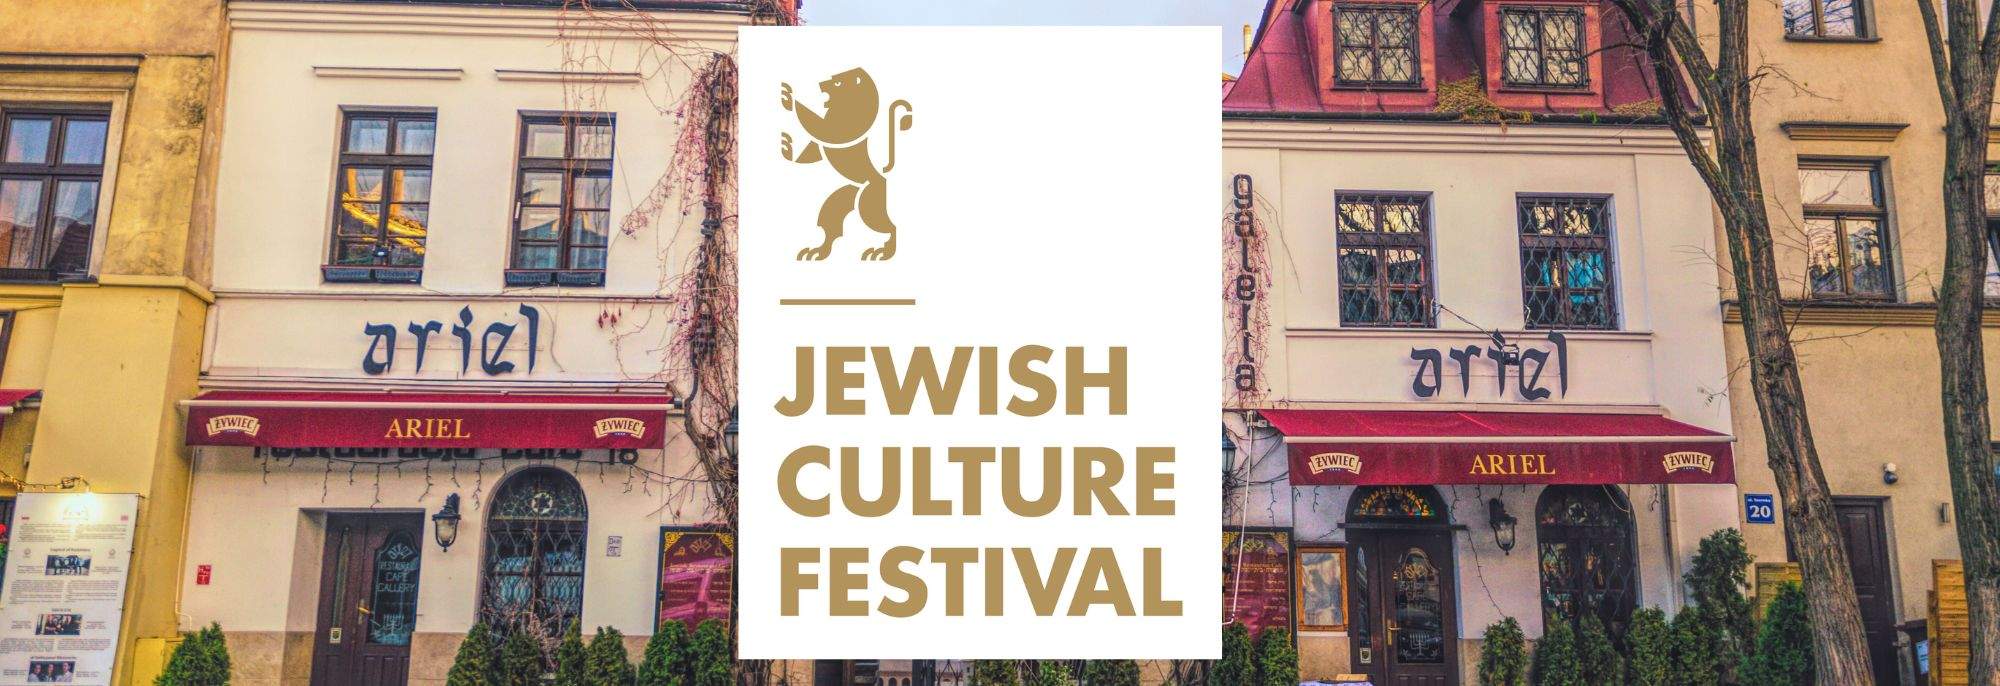 The 32nd Jewish Culture Festival Starts Tomorrow: A Cultural Celebration in Krakow